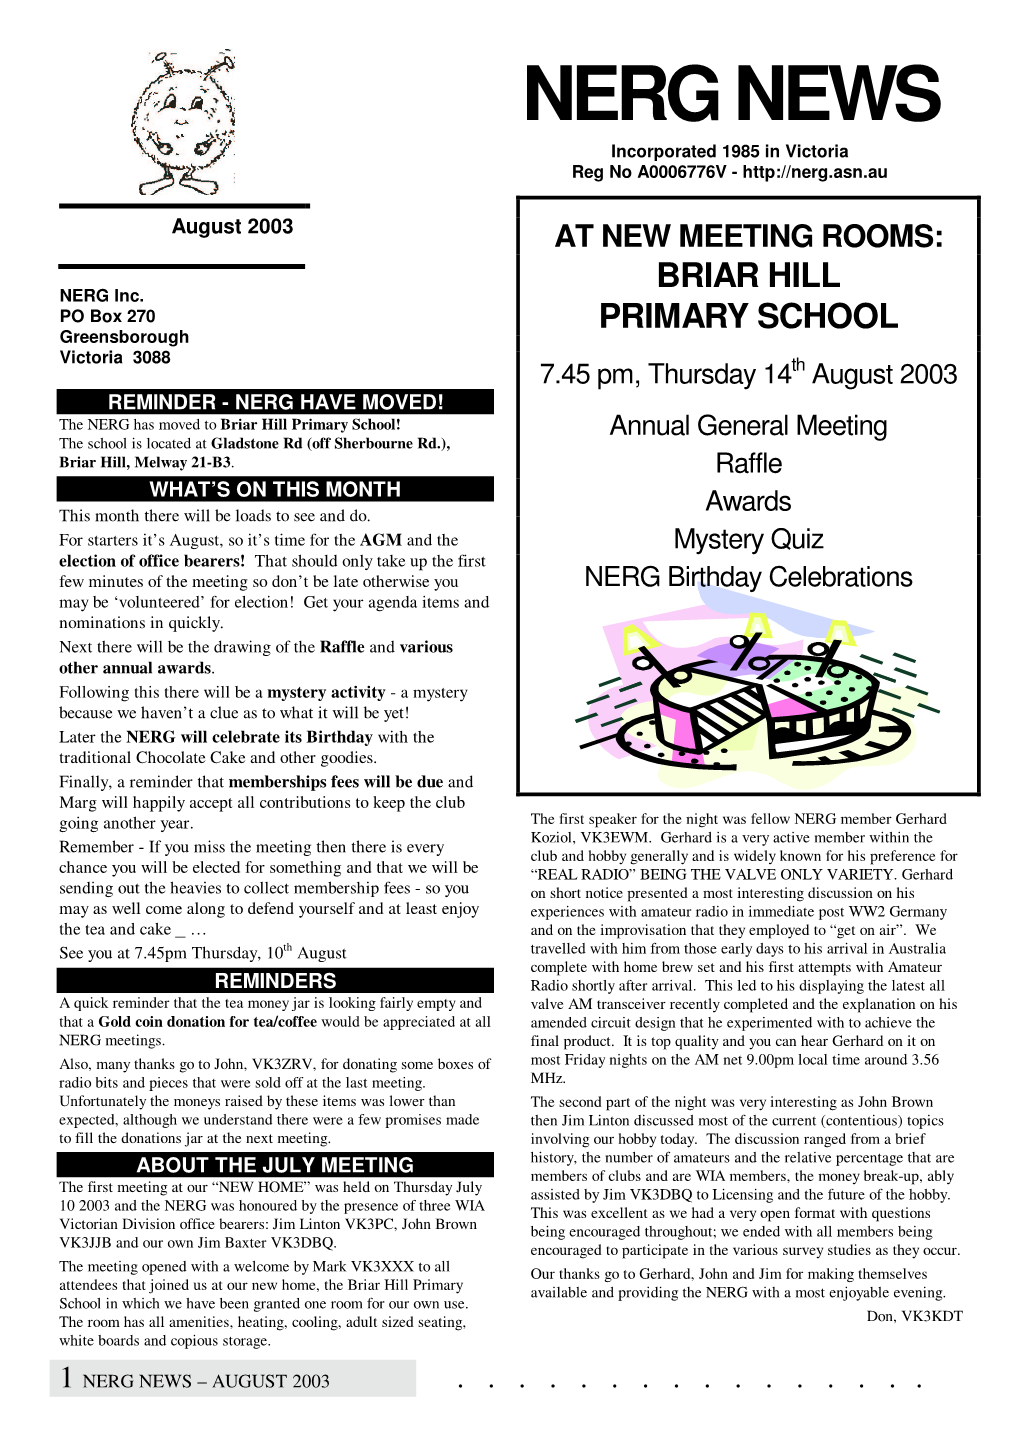 August 2003 at NEW MEETING ROOMS: BRIAR HILL NERG Inc